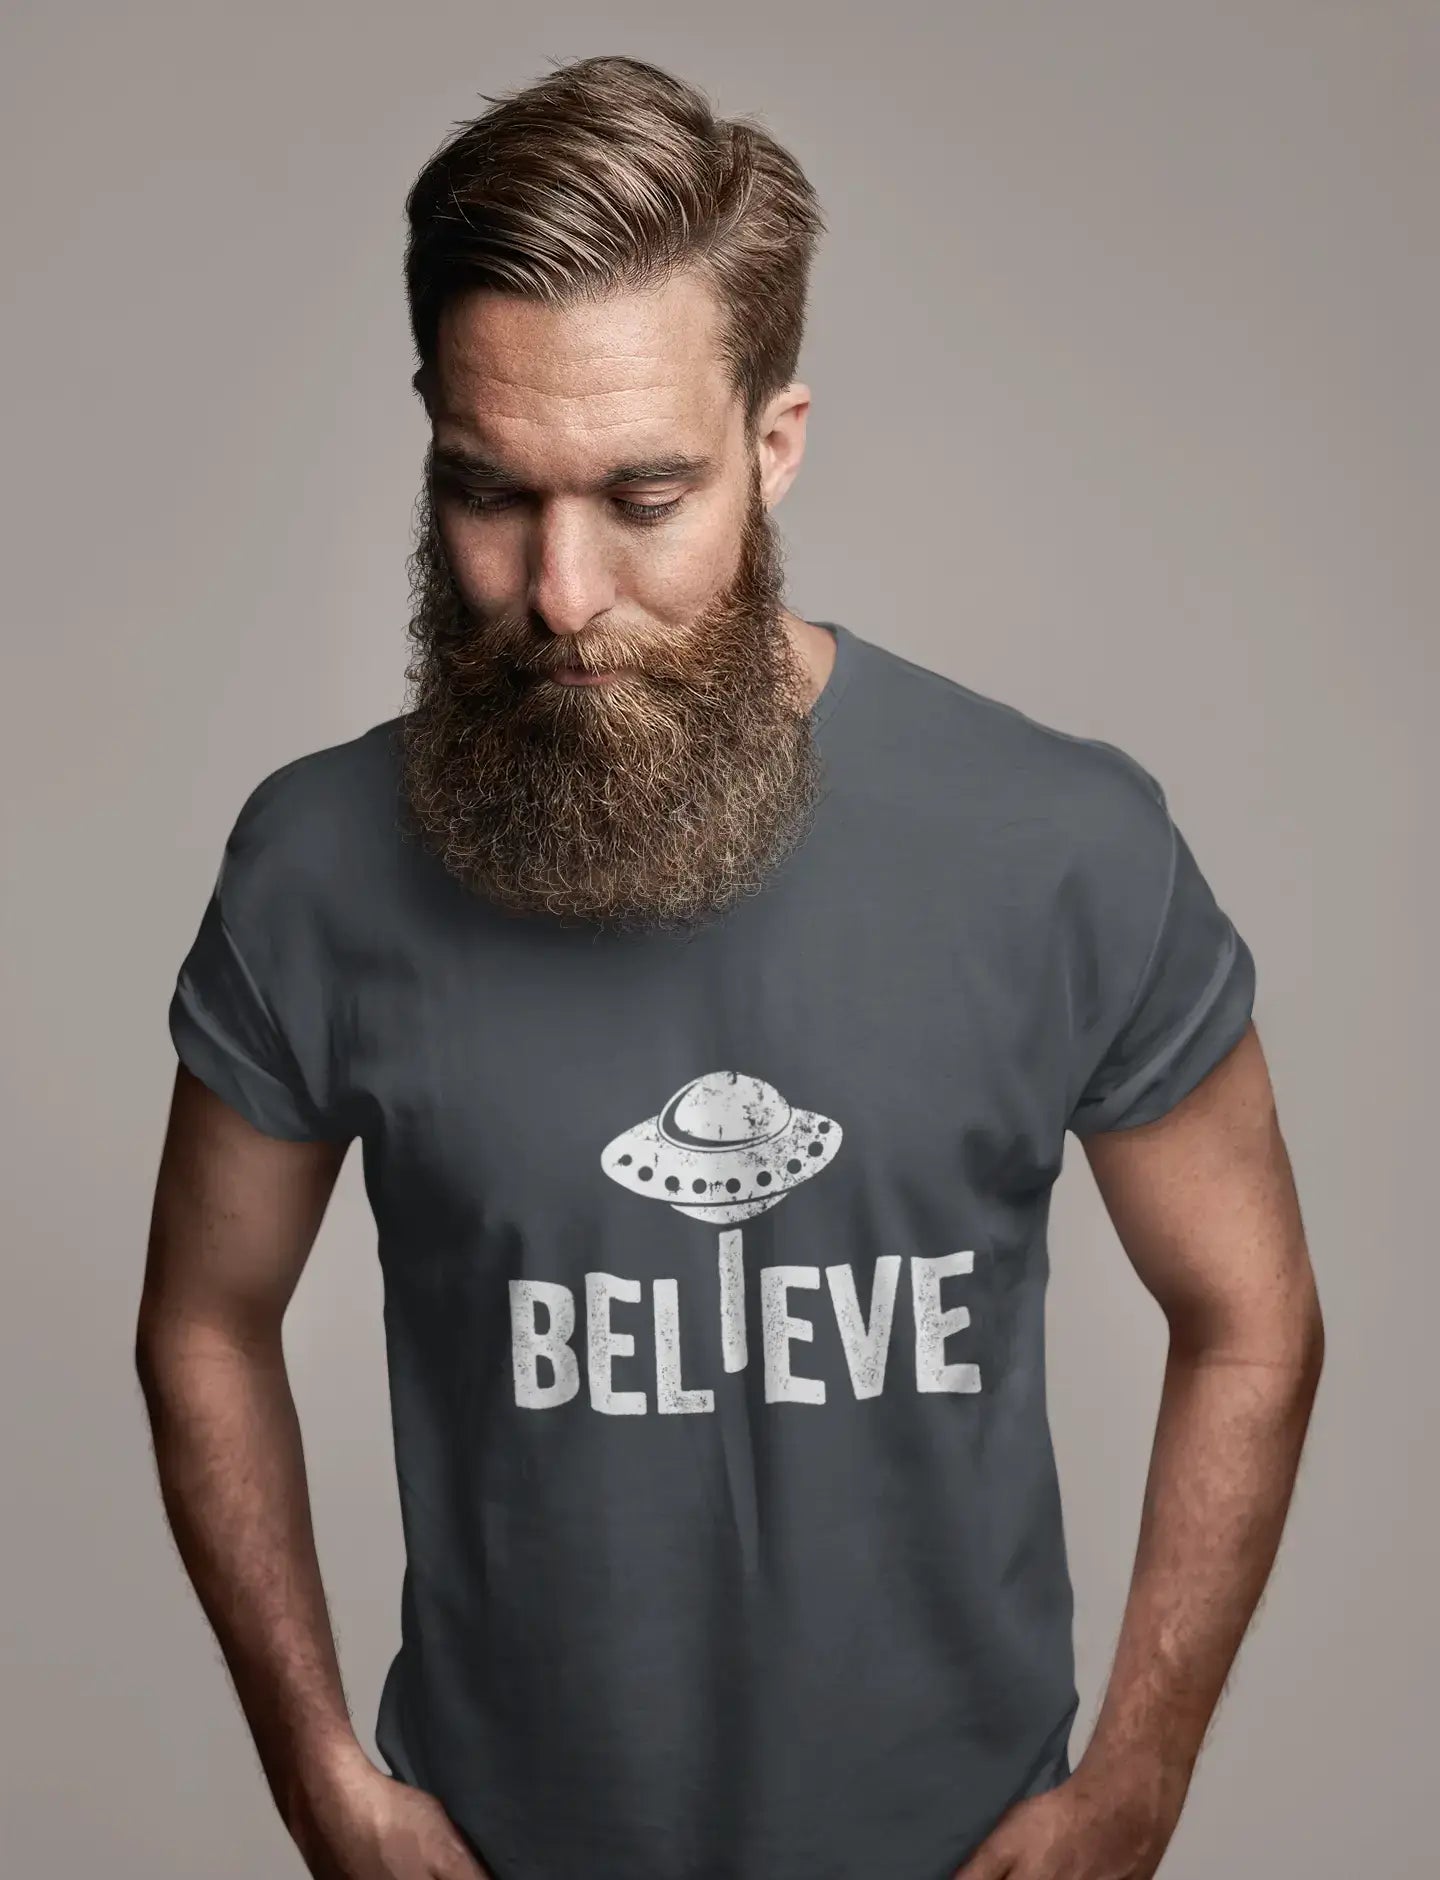 ULTRABASIC - Graphic Men's Believe UFO Alien T-Shirt Funny Casual Letter Print Tee French Navy